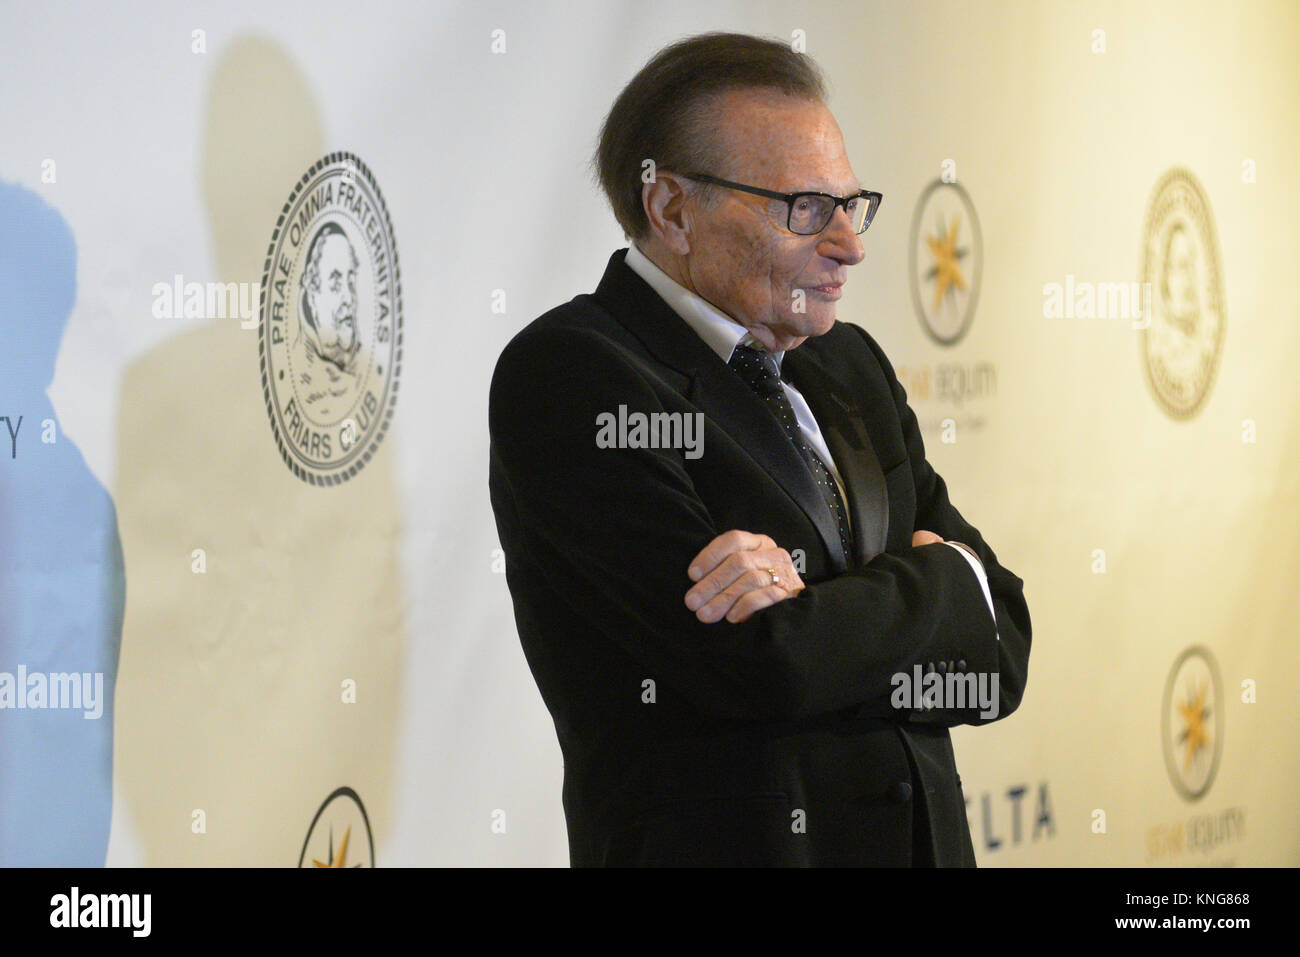 Larry King attends the Friars Club honors Tony Bennett with the Entertainment Icon award at the New York Sheraton Hotel on June 20, 2016 in New York. Stock Photo